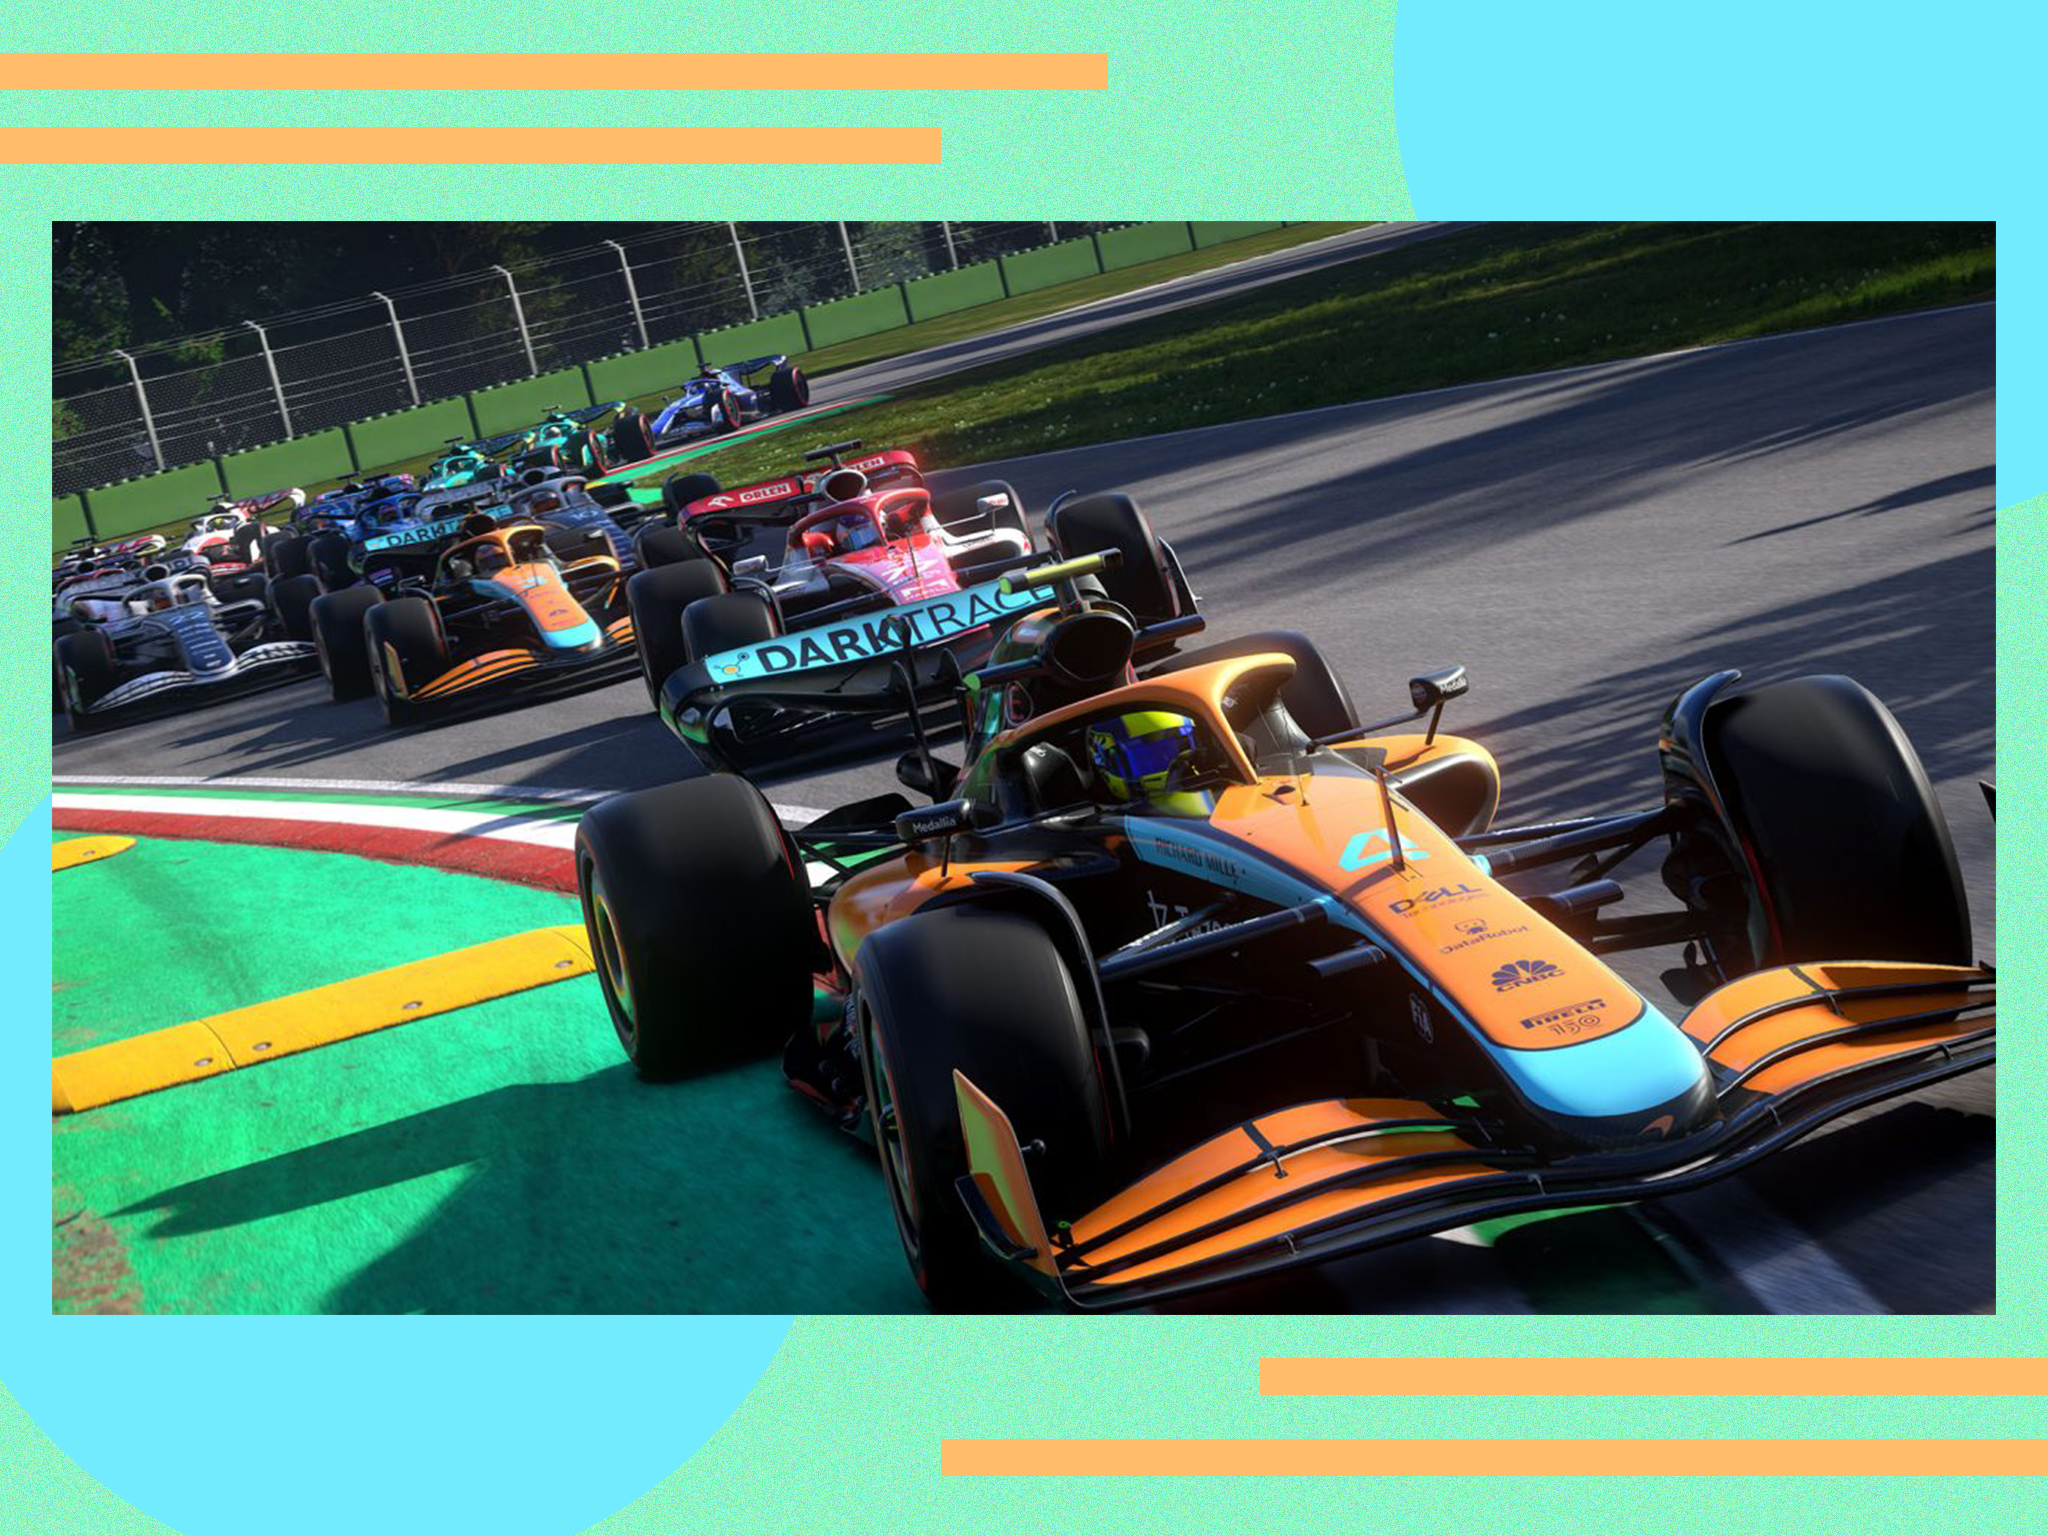 F1 22 game crossplay – can Xbox and PlayStation owners race together?